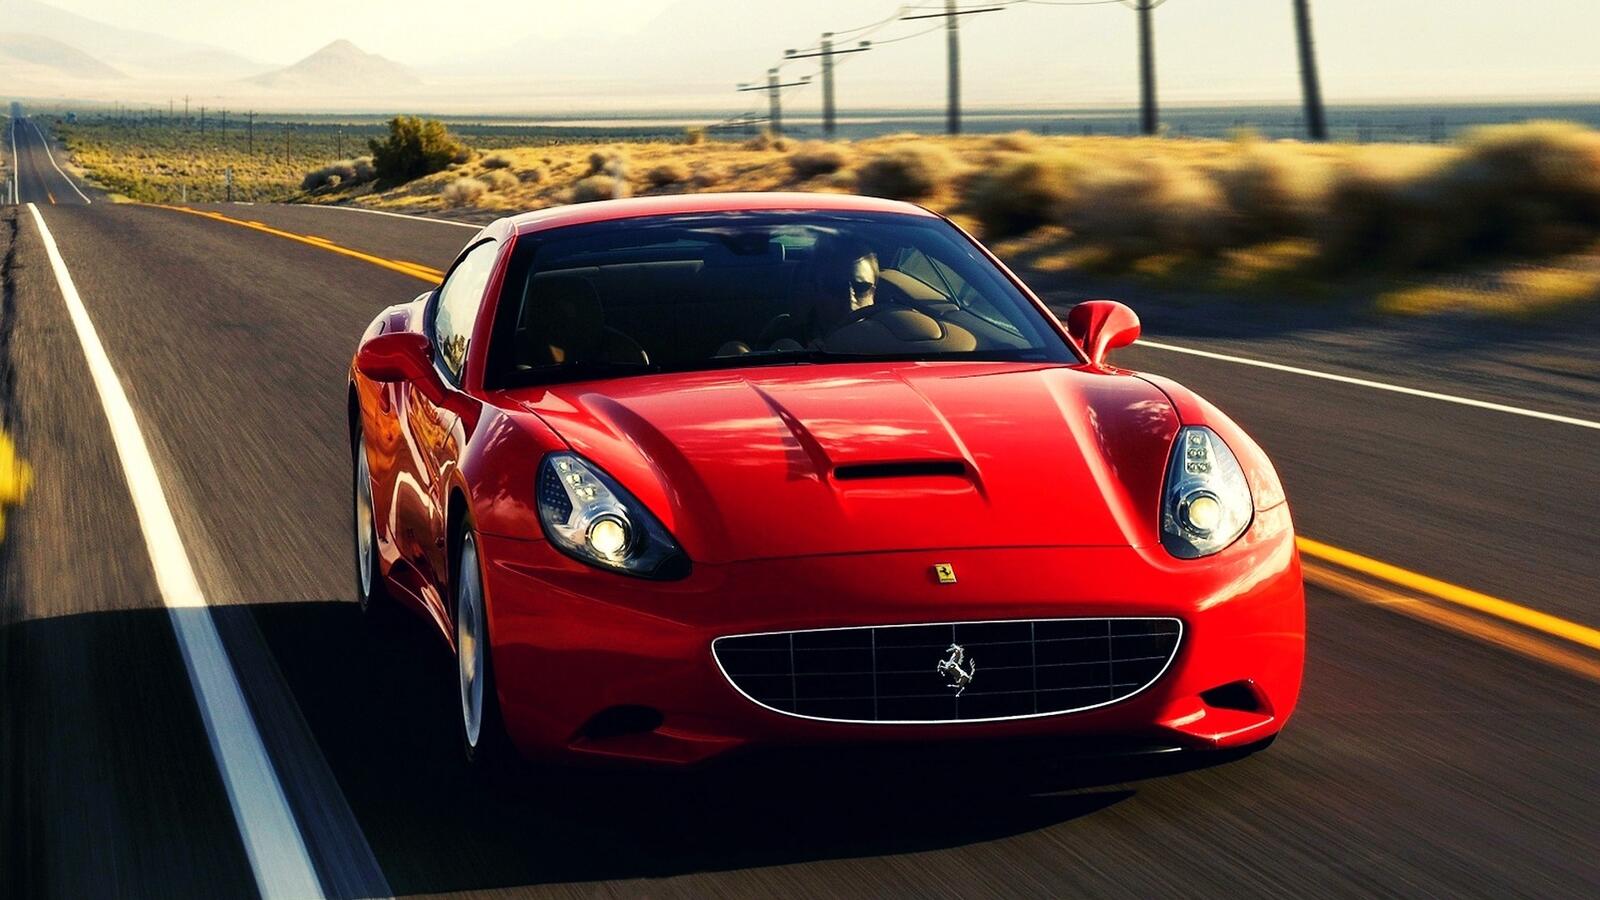 Free photo Wallpaper with a red Ferrari California on a country highway